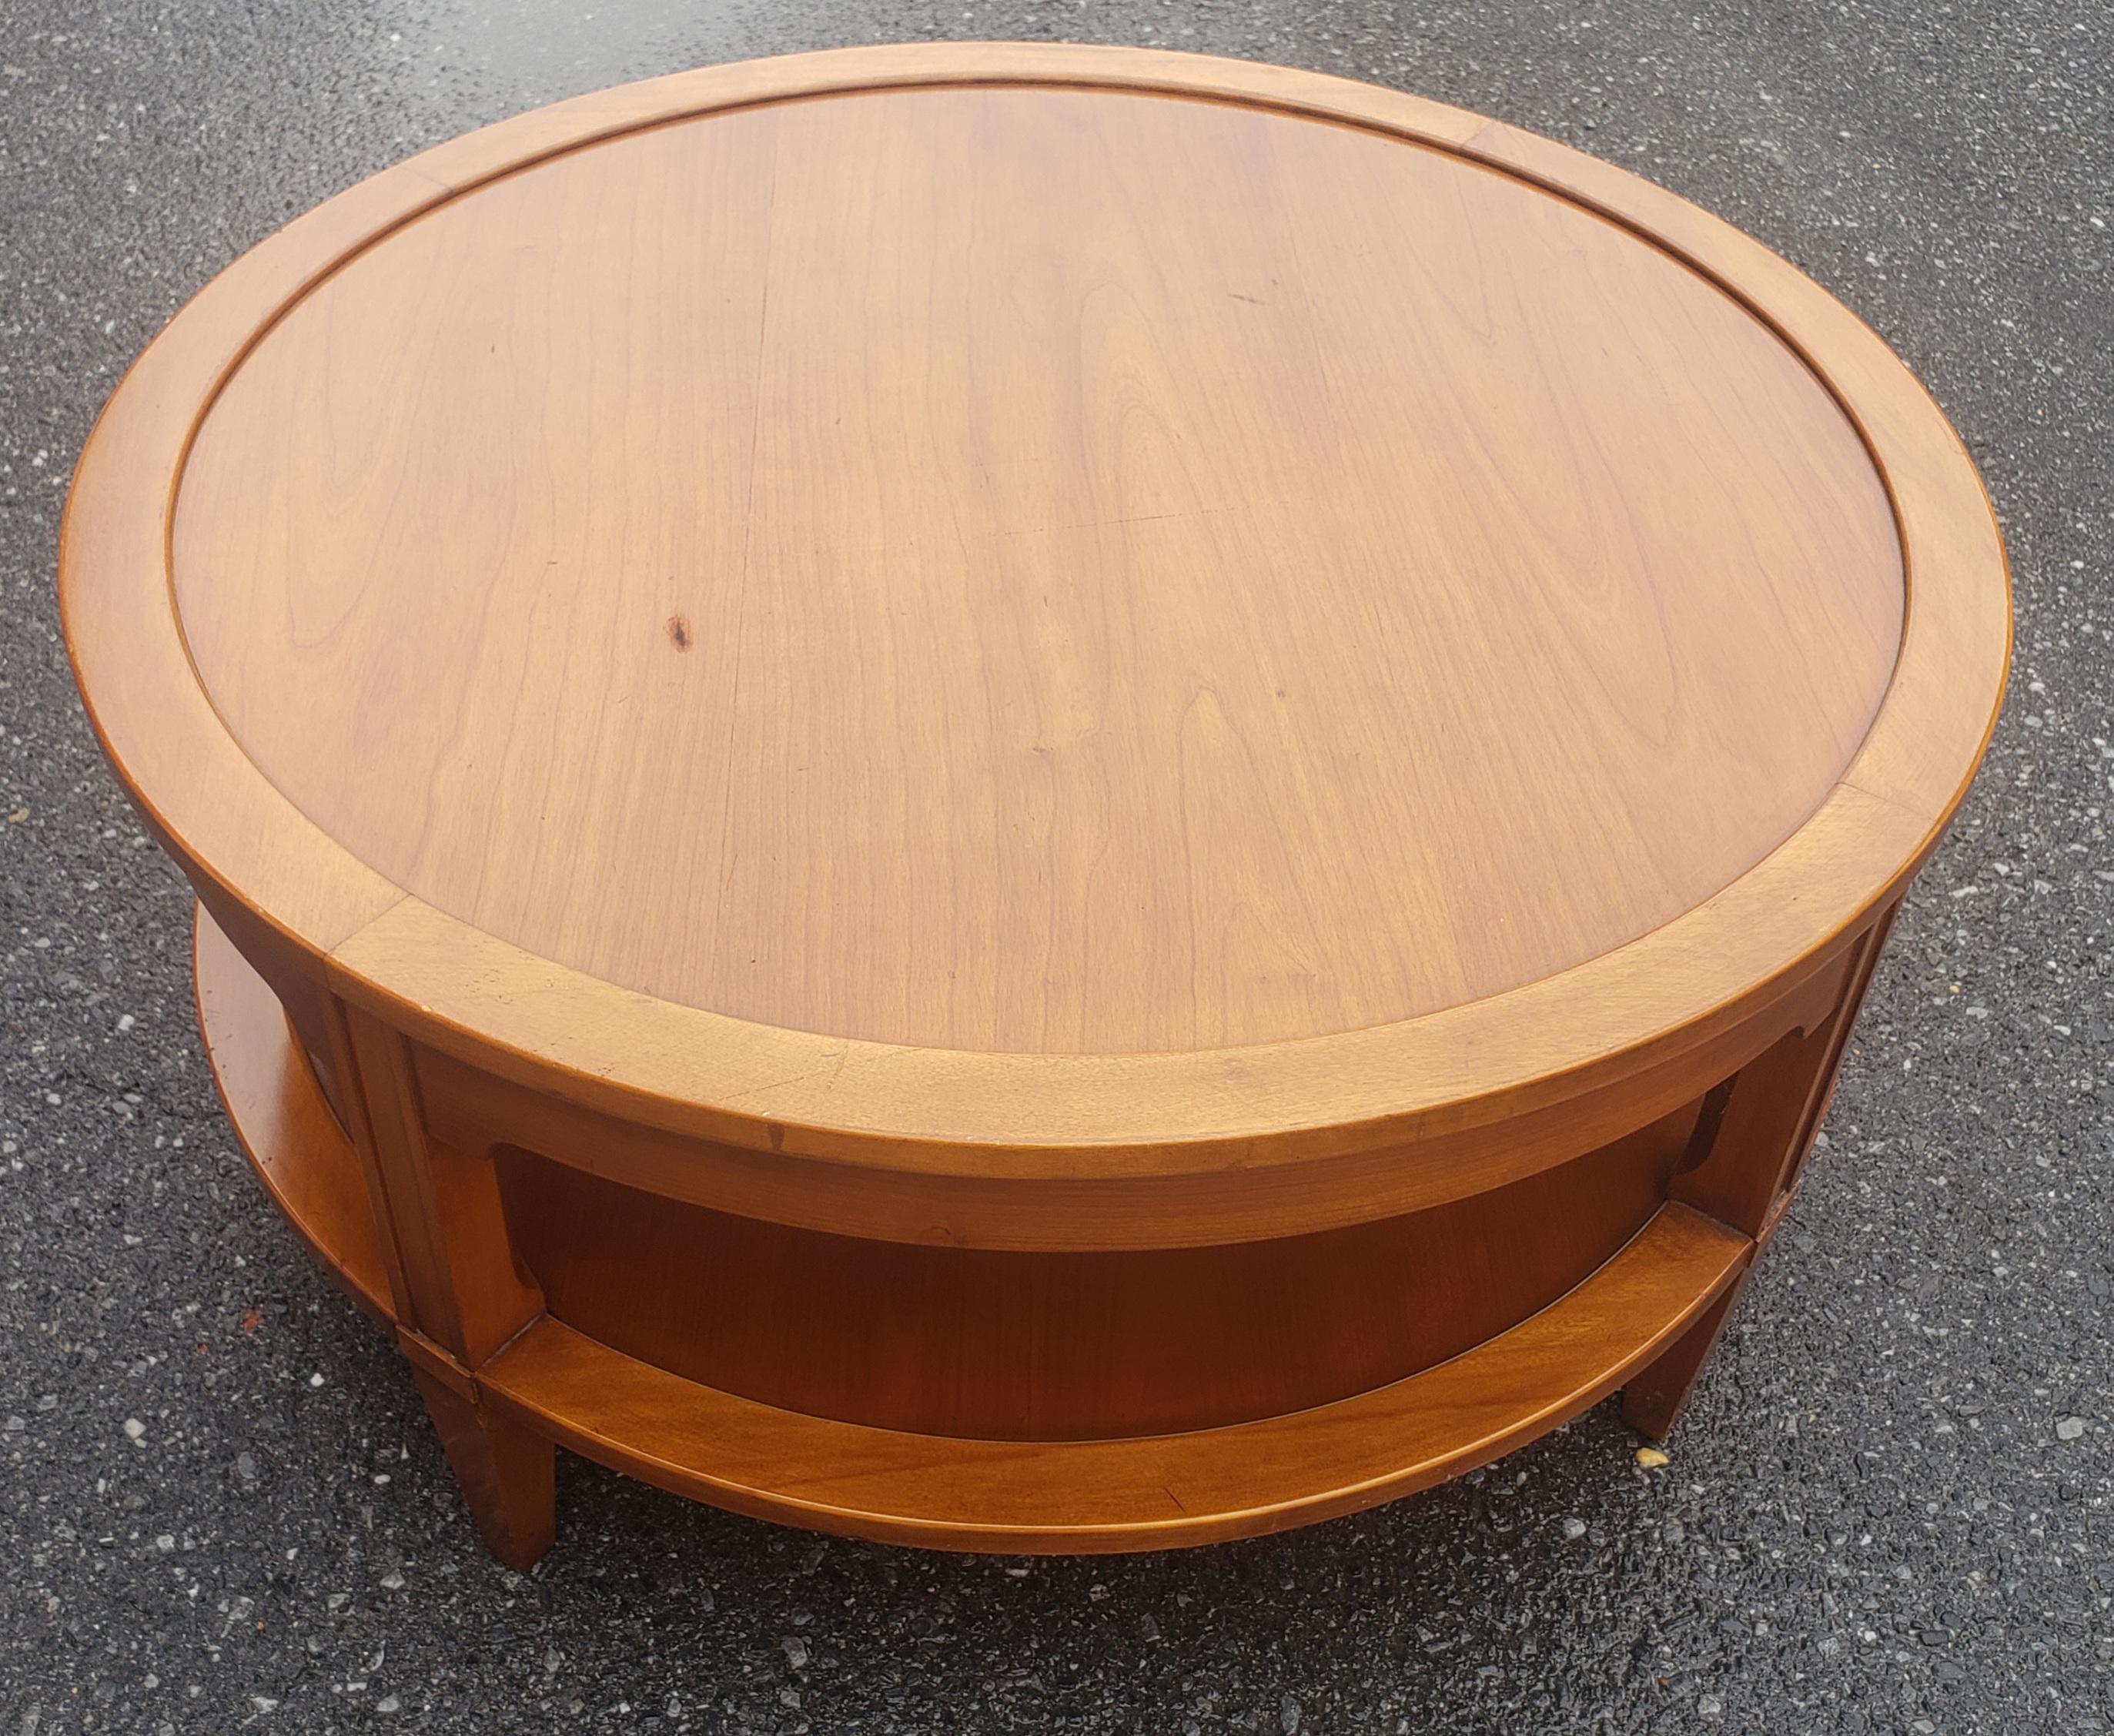 MId-Century Fruitwood Two-Tier Coffee Table Cocktail Table In Good Condition For Sale In Germantown, MD